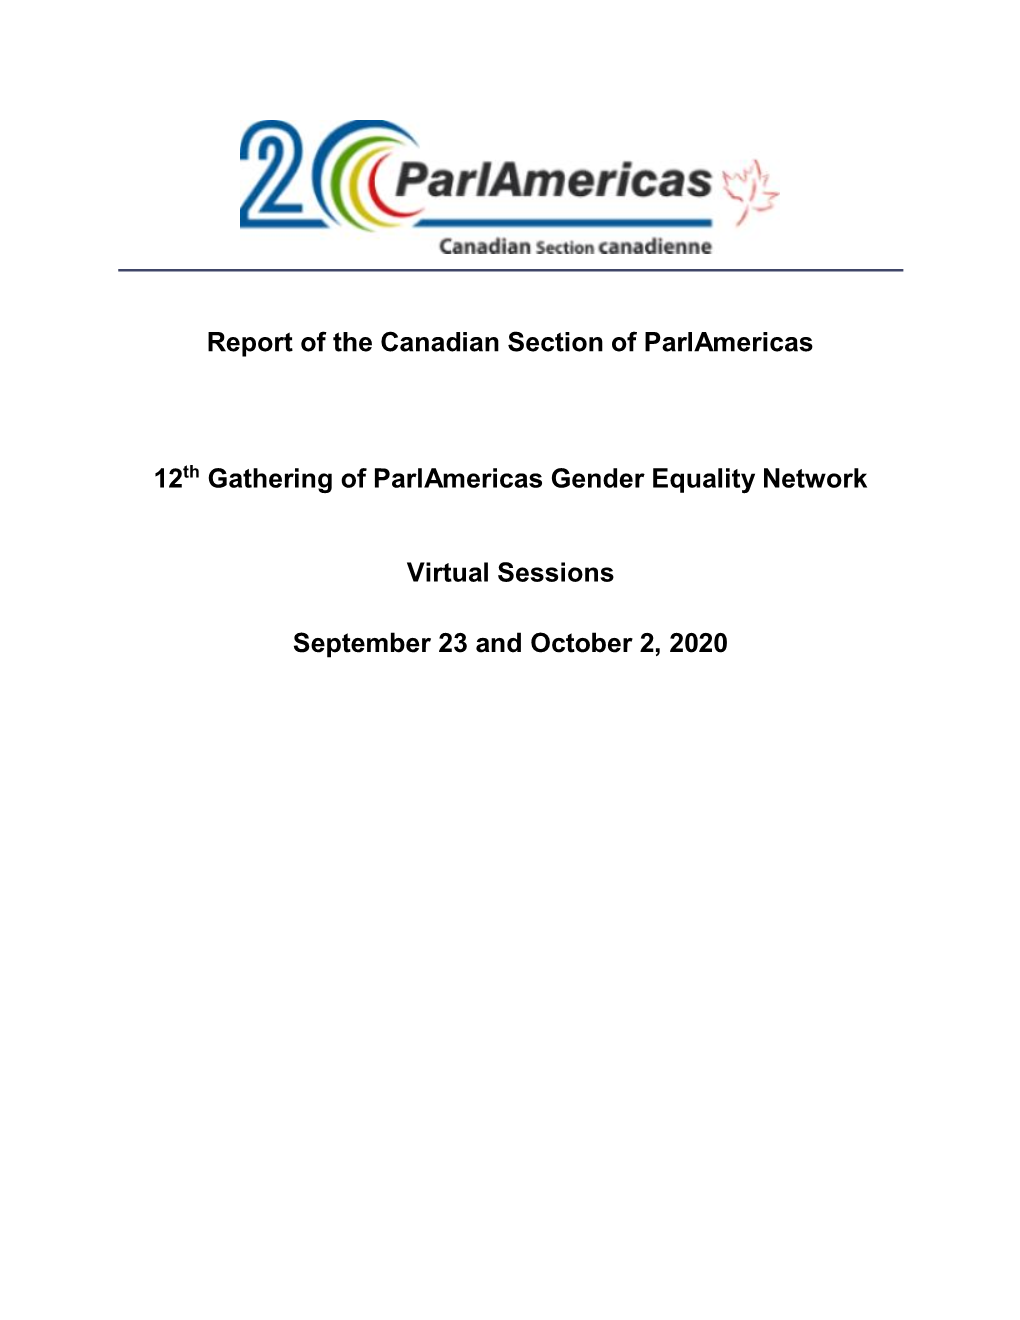 12Th Gathering of Parlamericas Gender Equality Network -- By